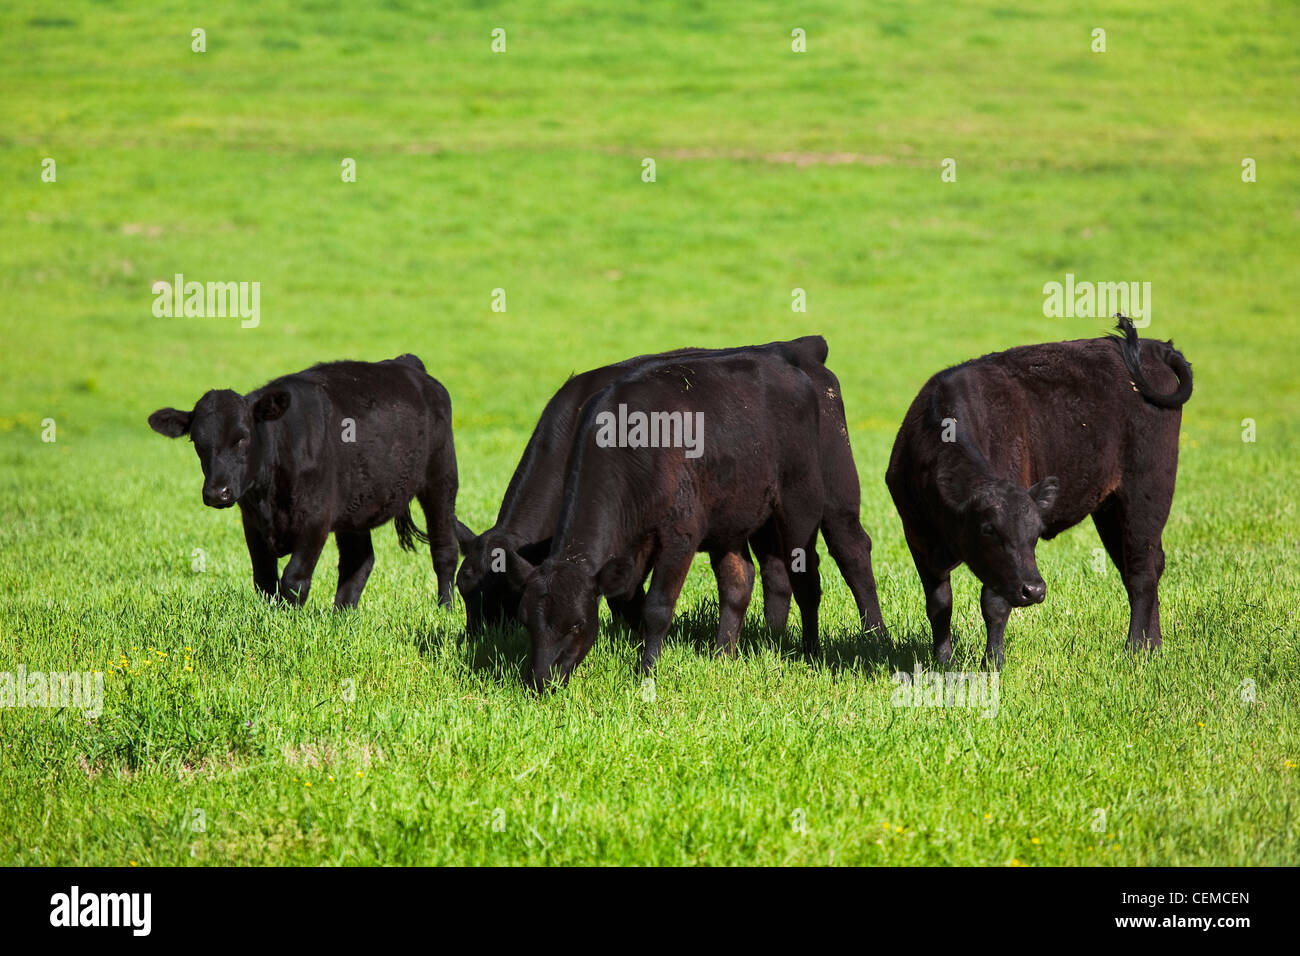 Livestock - Black Angus beef cattle grazing on a healthy green pasture / Arkansas, USA. Stock Photo